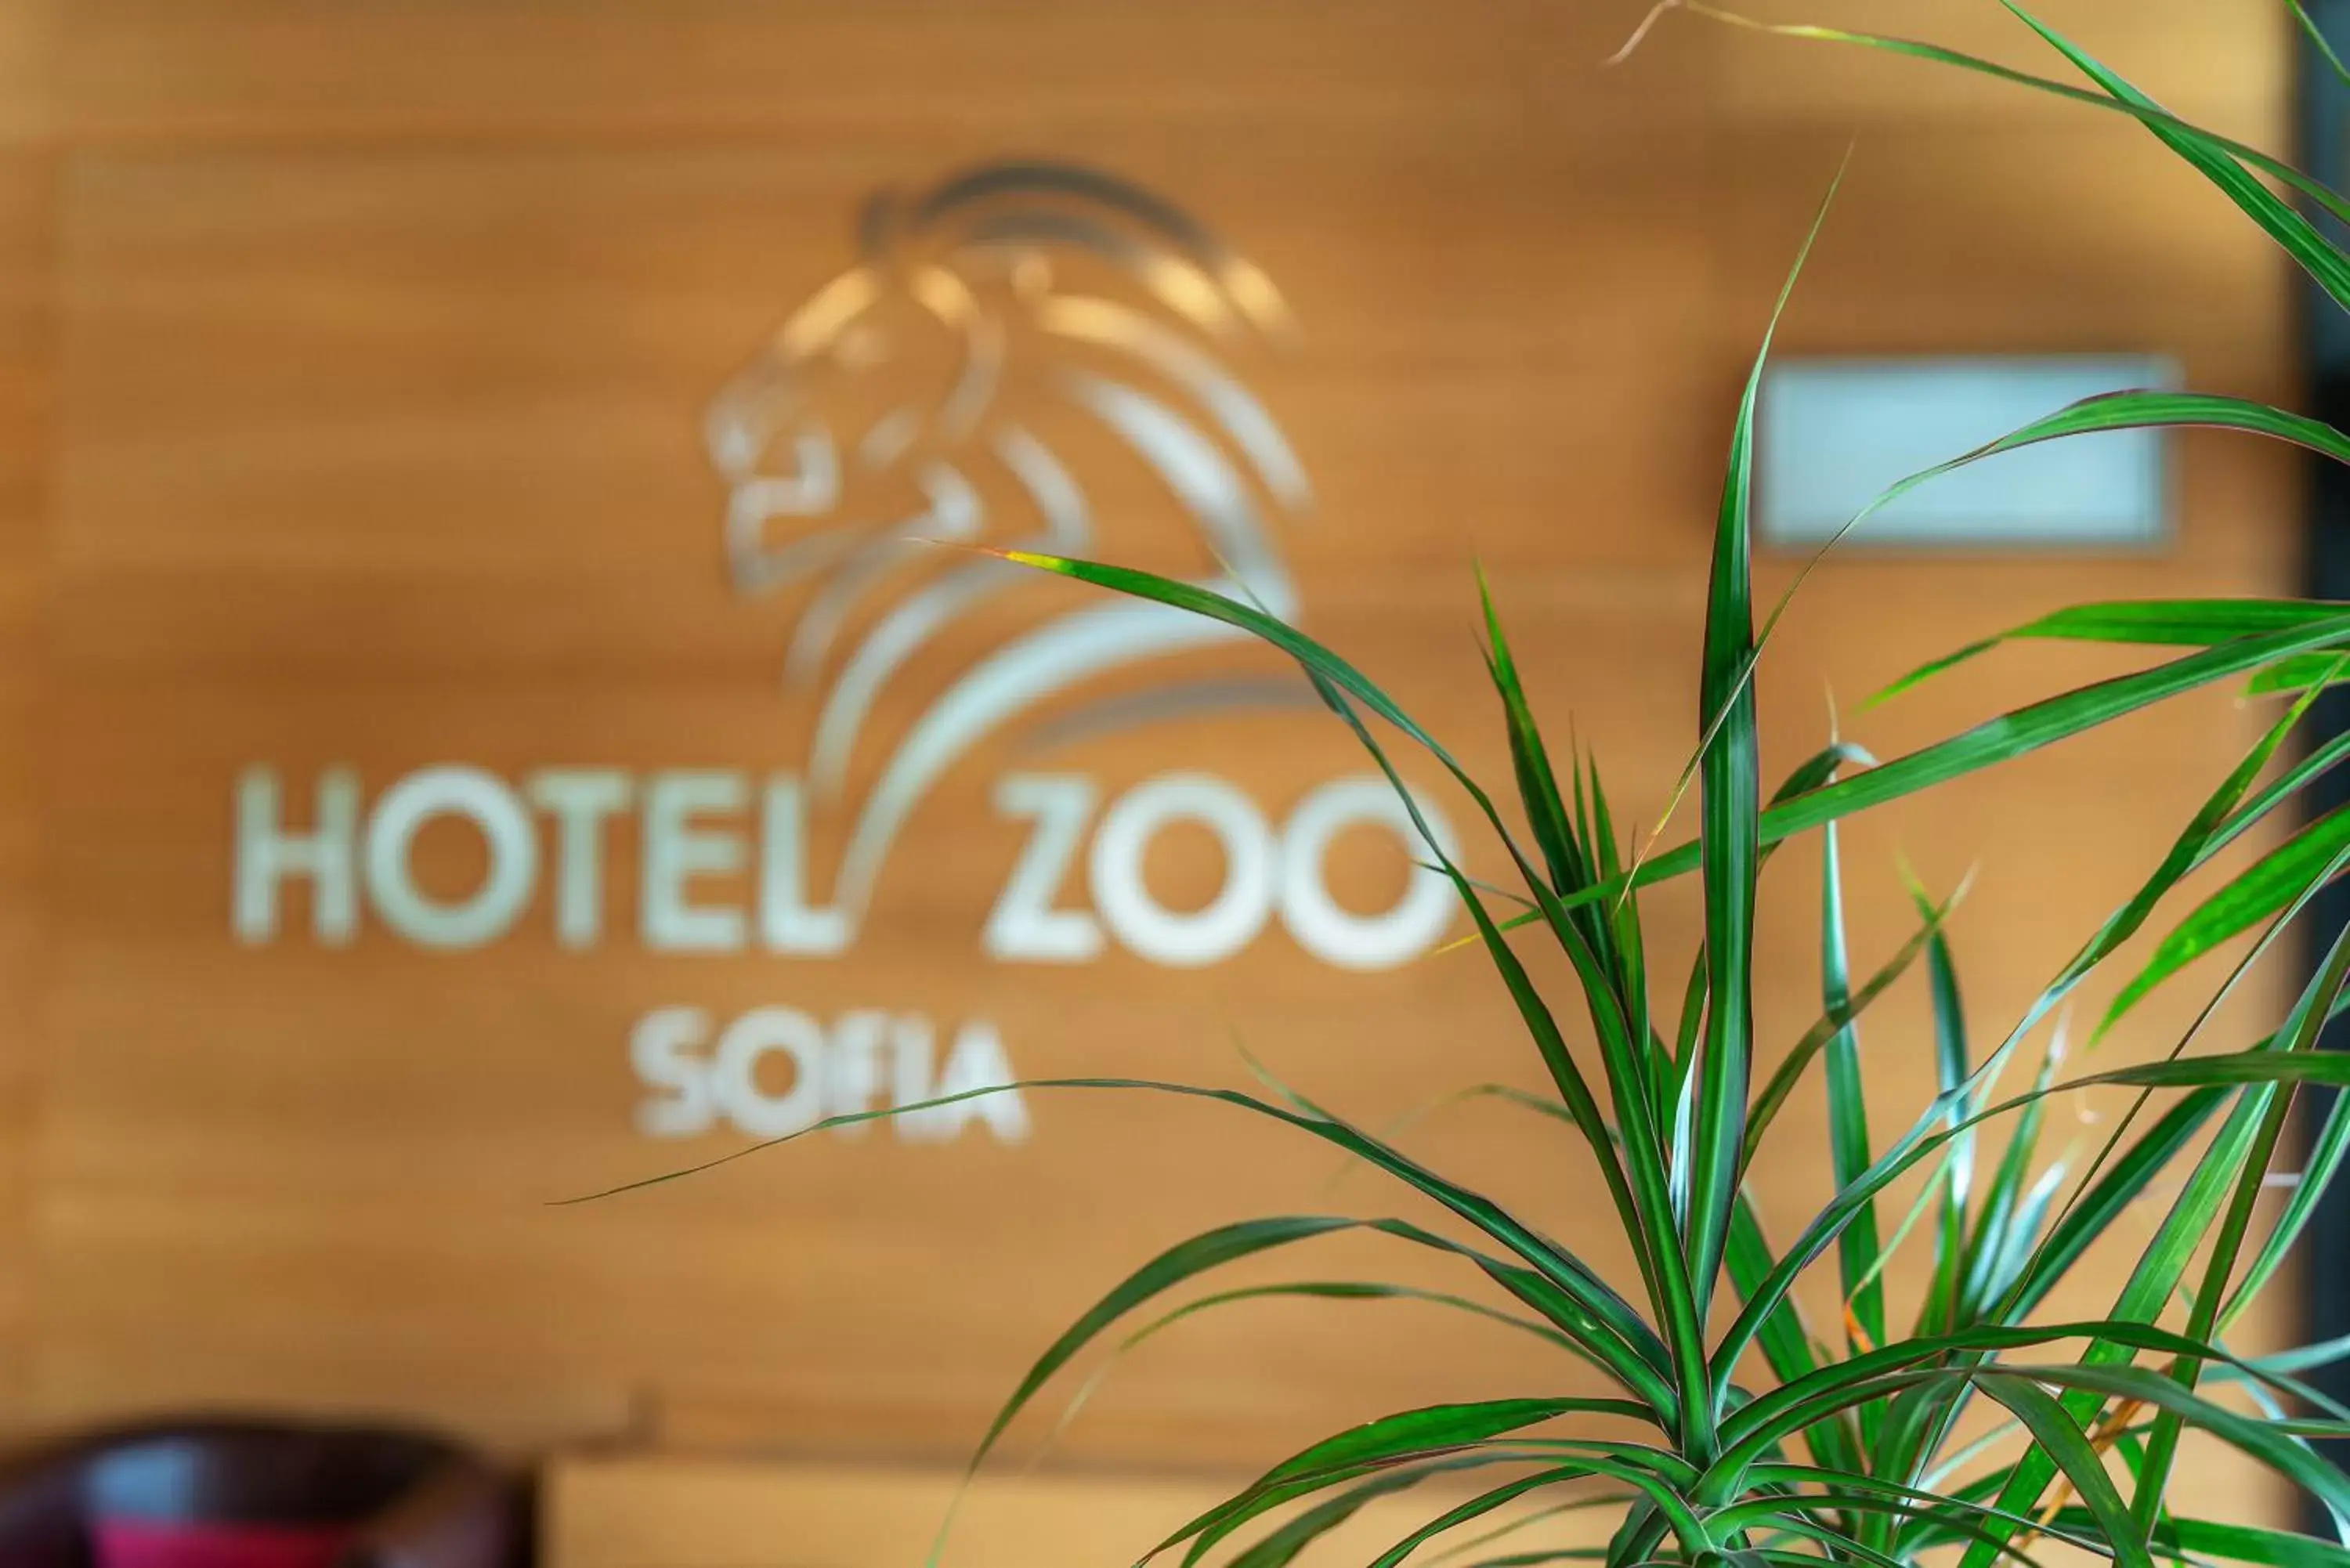 Property logo or sign, Property Logo/Sign in Hotel ZOO Sofia - Secured Paid Parking